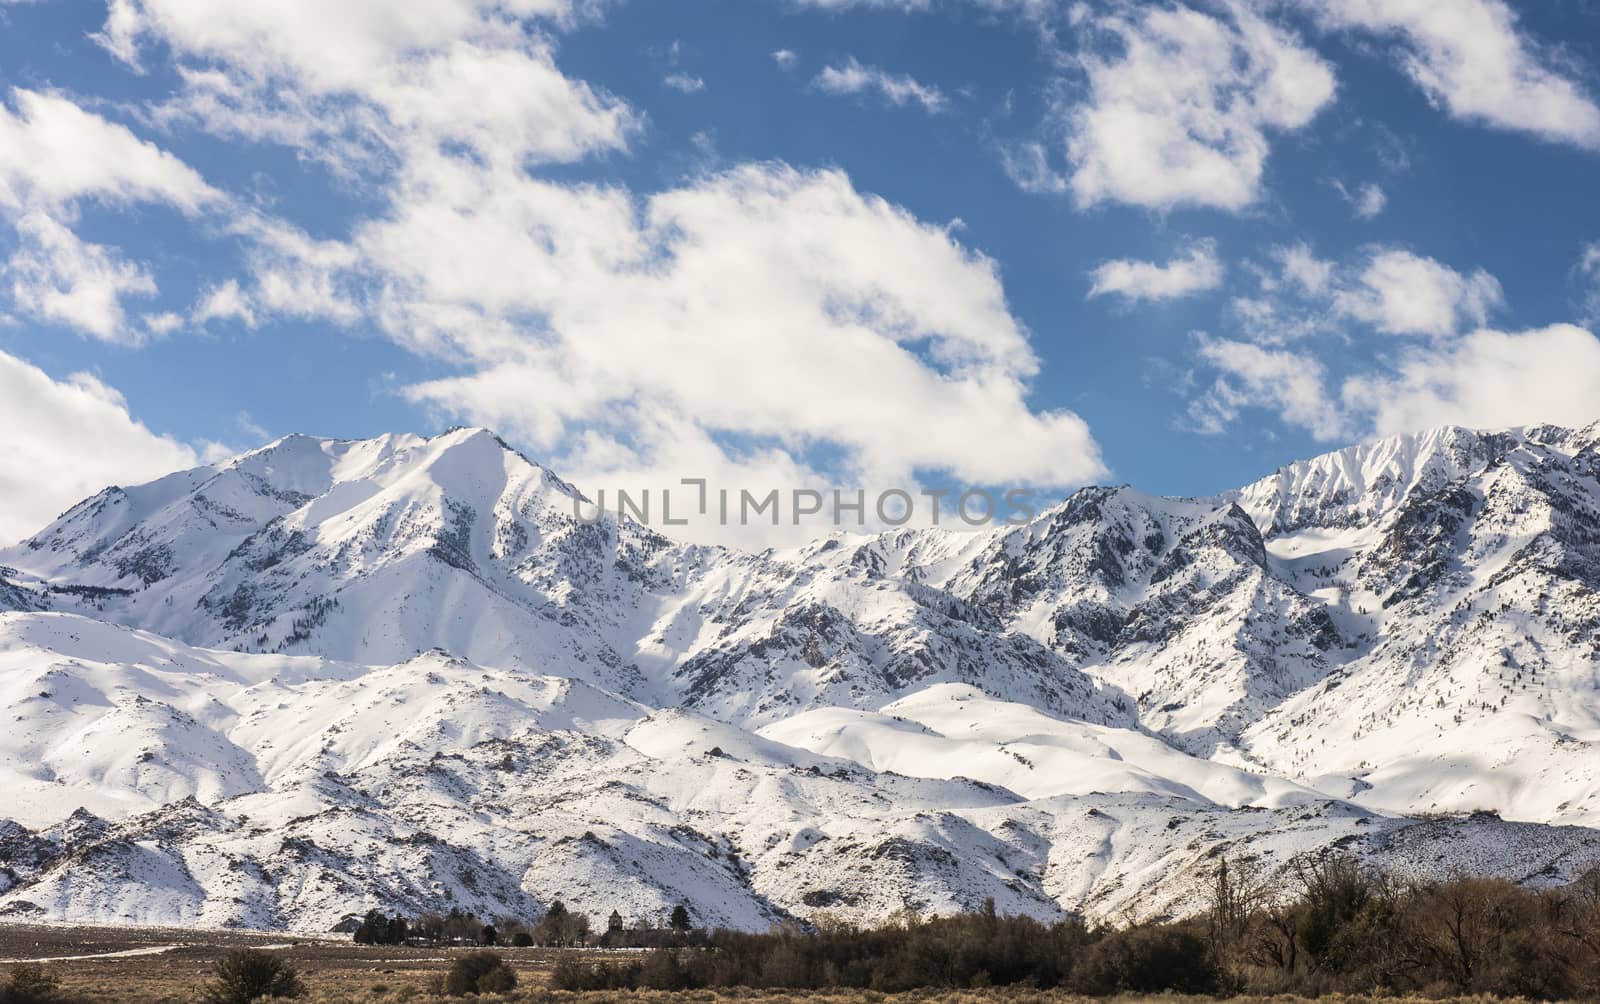 View of the SIerras in winter from highway 395 by Njean